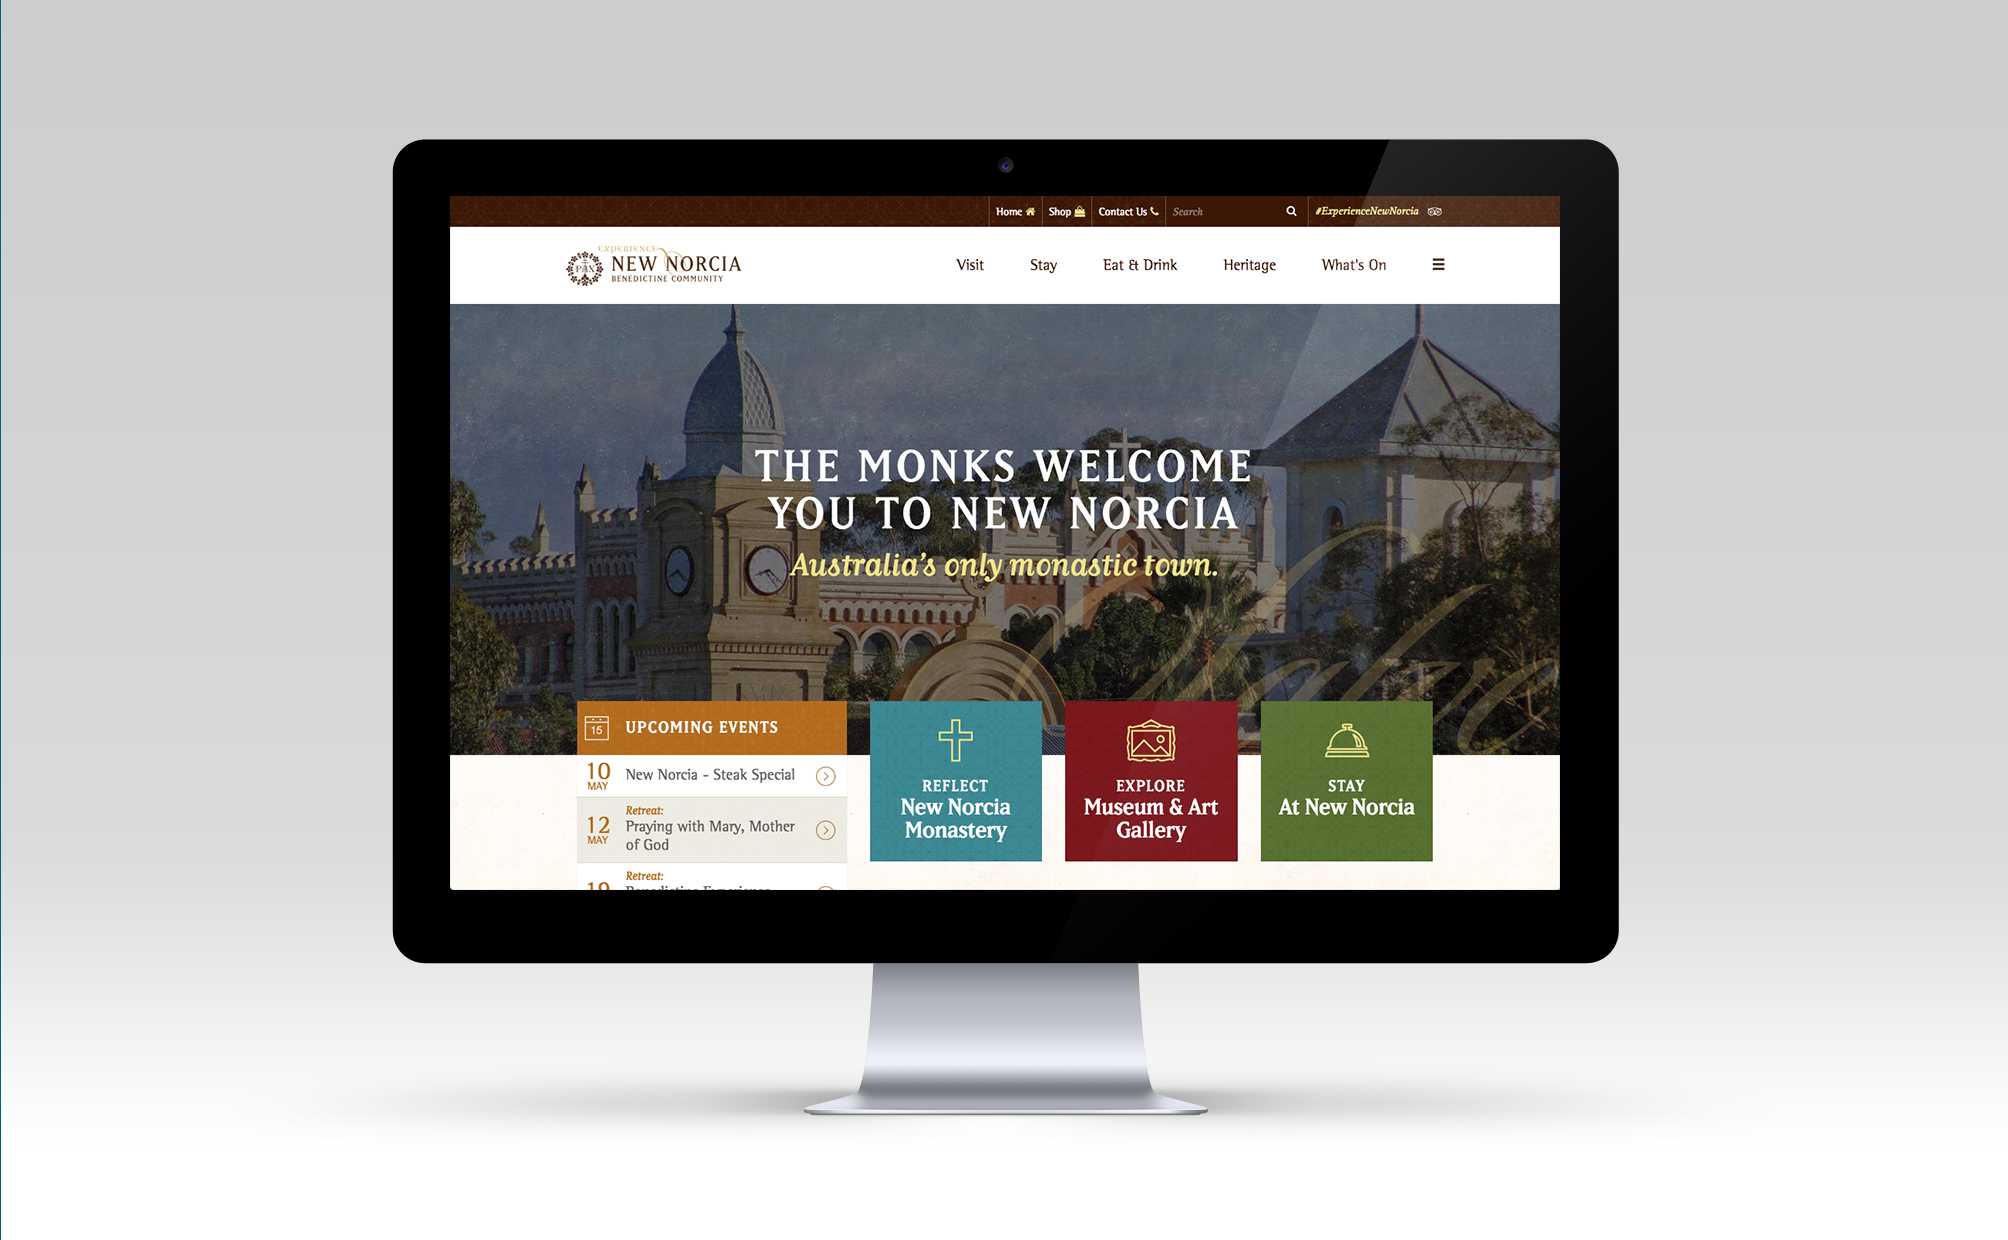 New Norcia Website - Homepage carousel and calendar of events